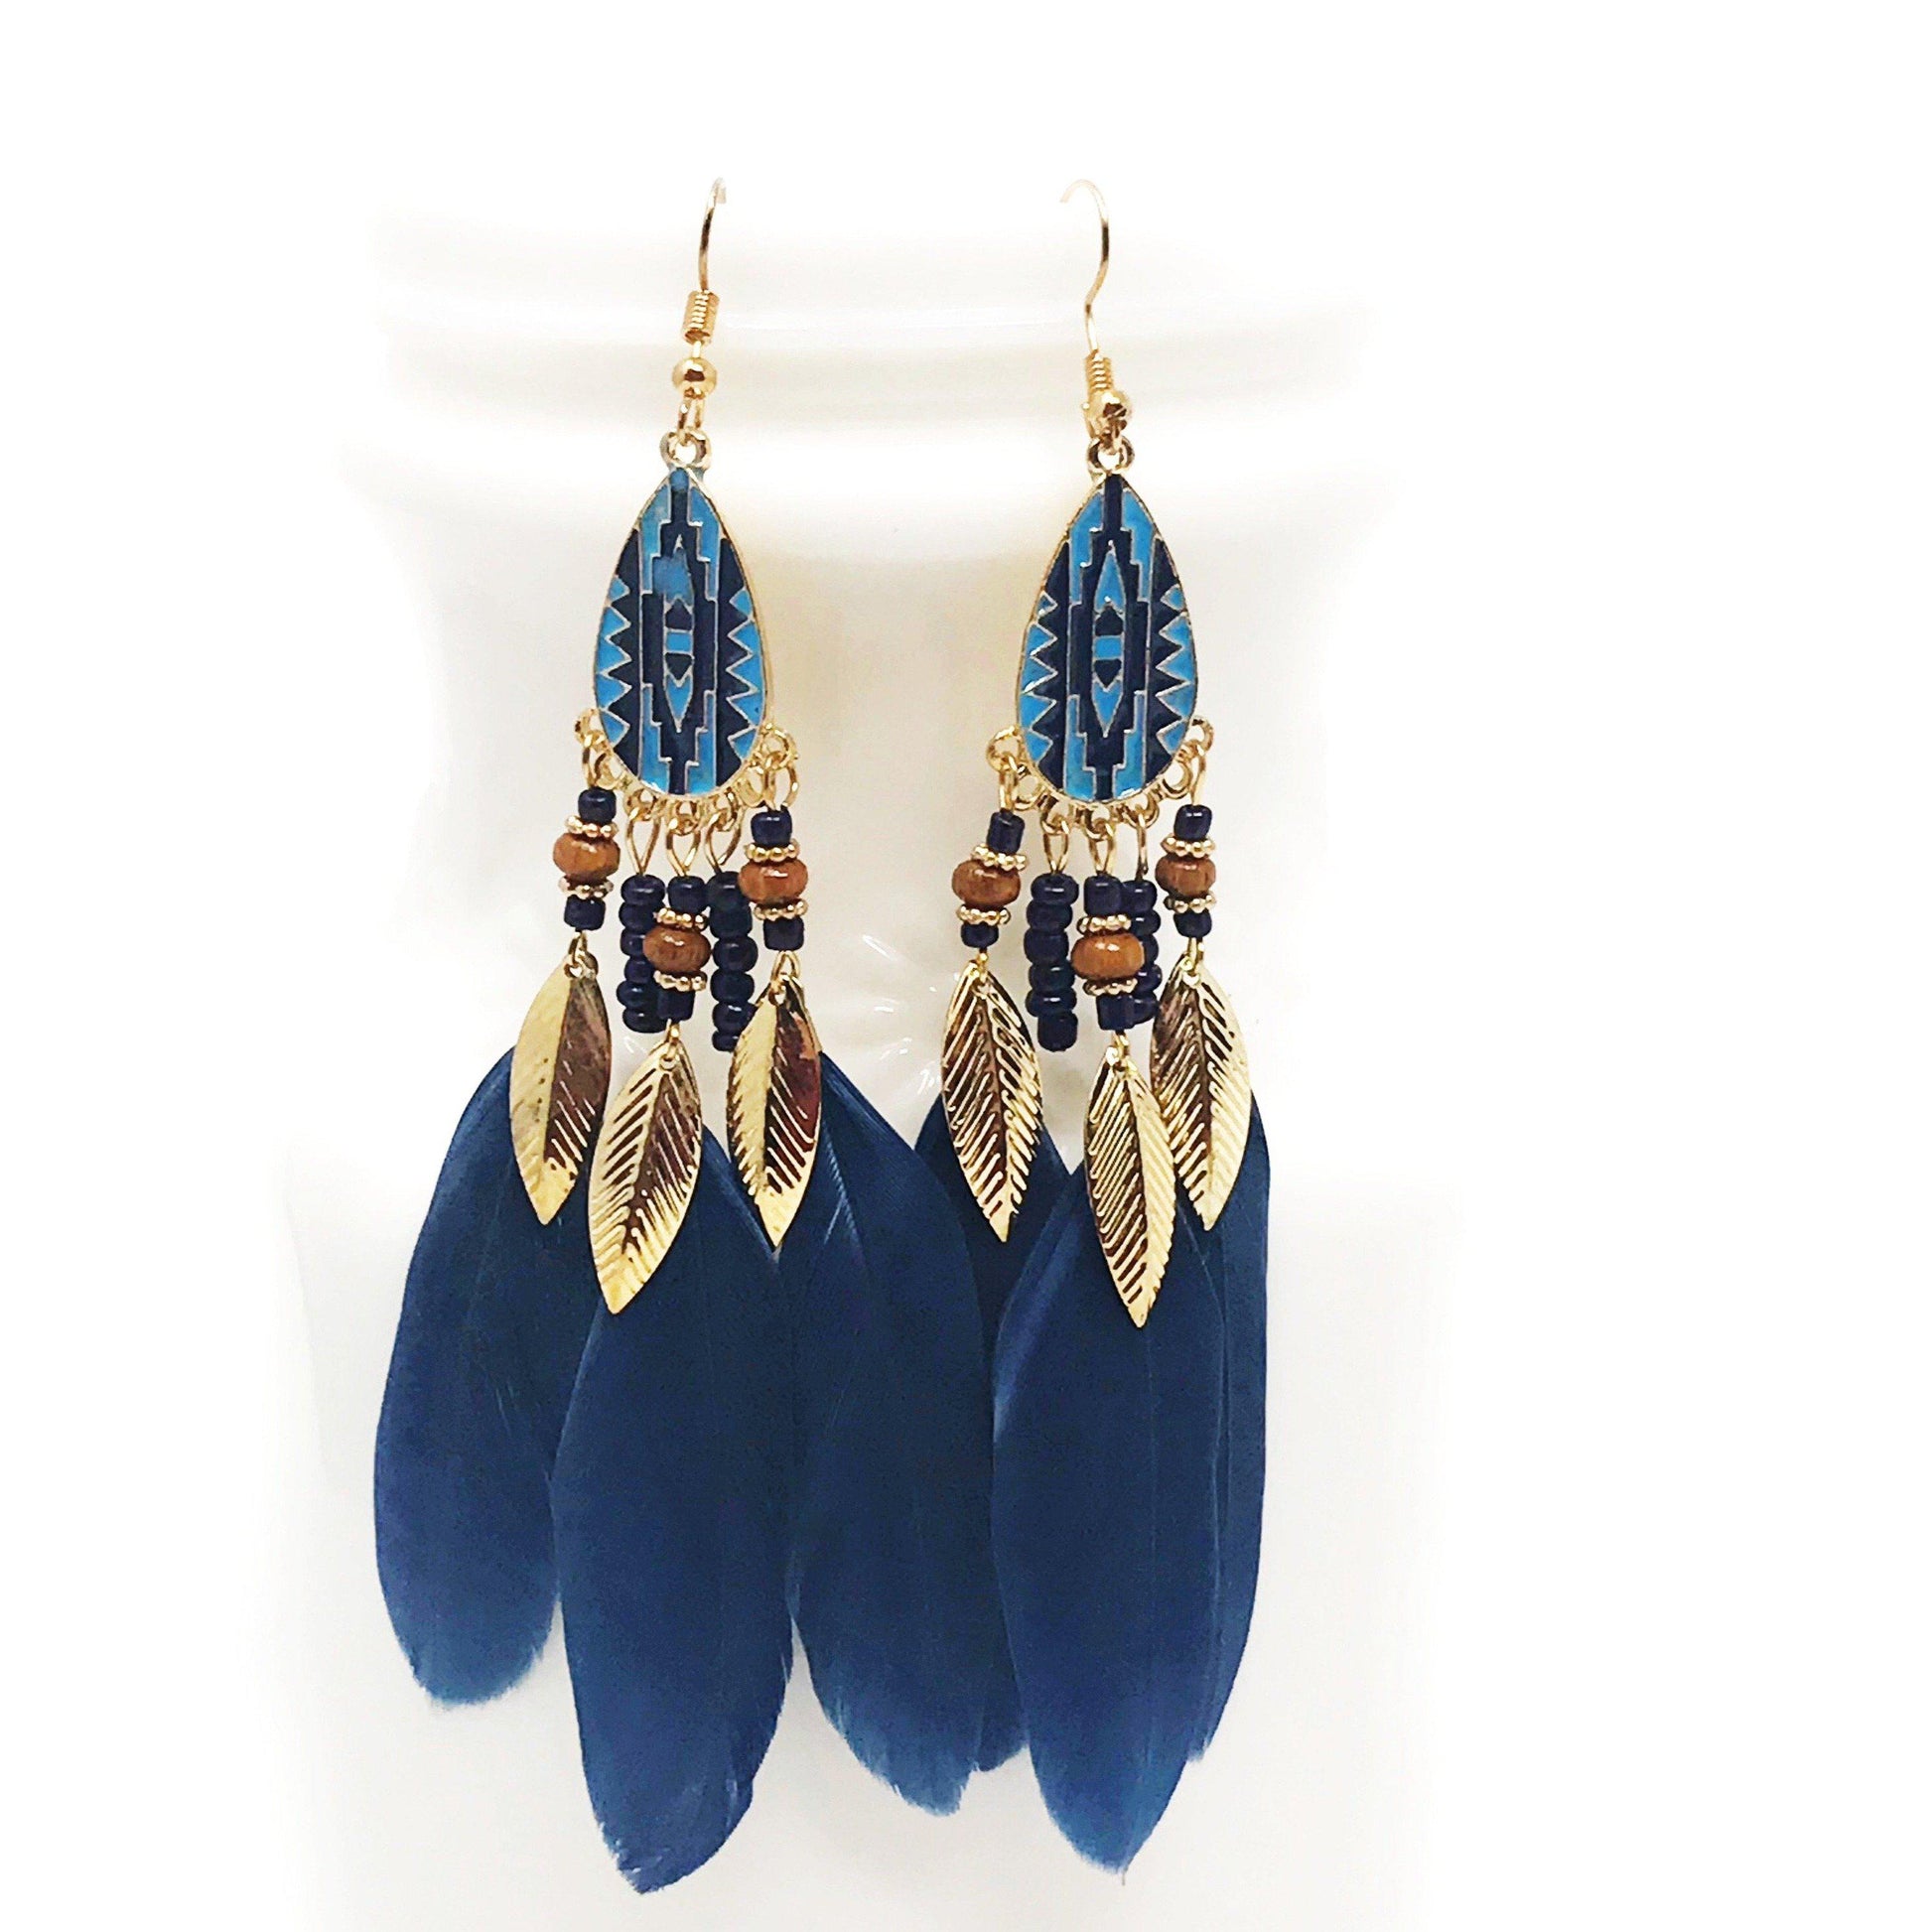 Blue Feather Dangle Earrings - Boho-inspired Chic Accessories